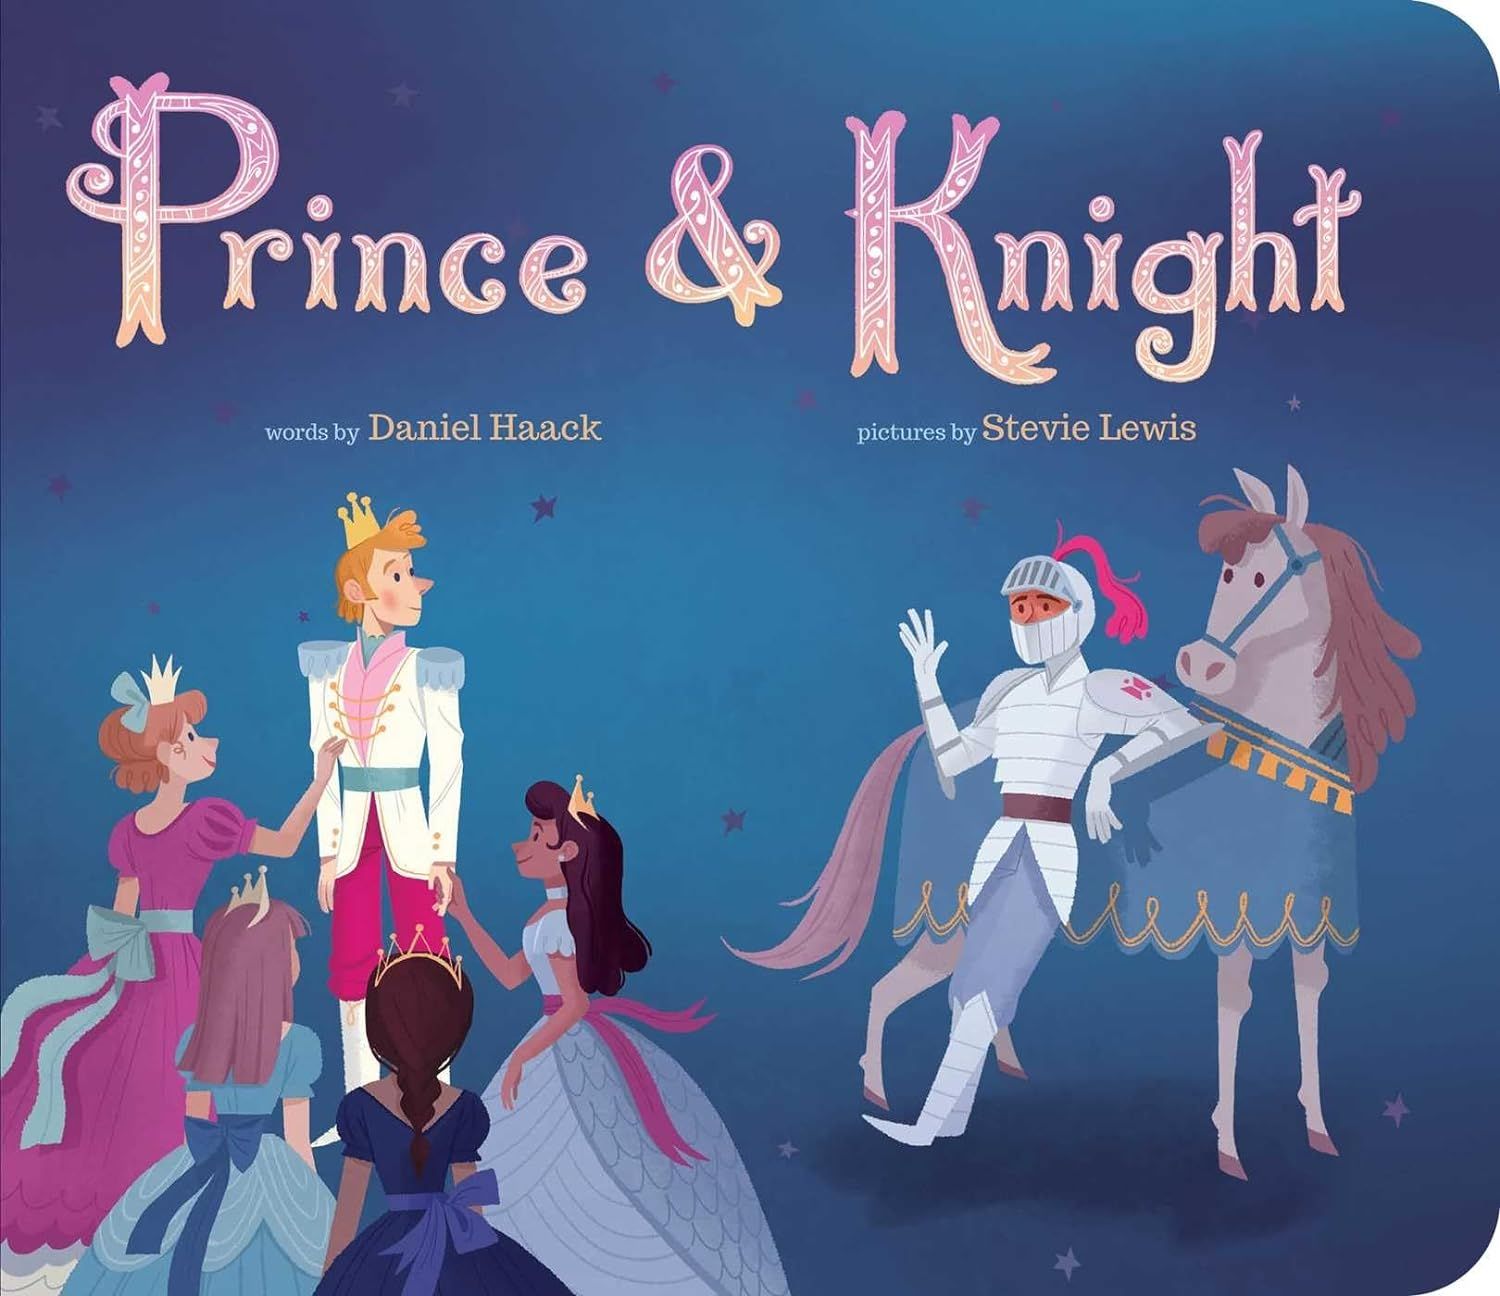 Cover of Prince & Knight by Daniel Haack & Stevie Lewis